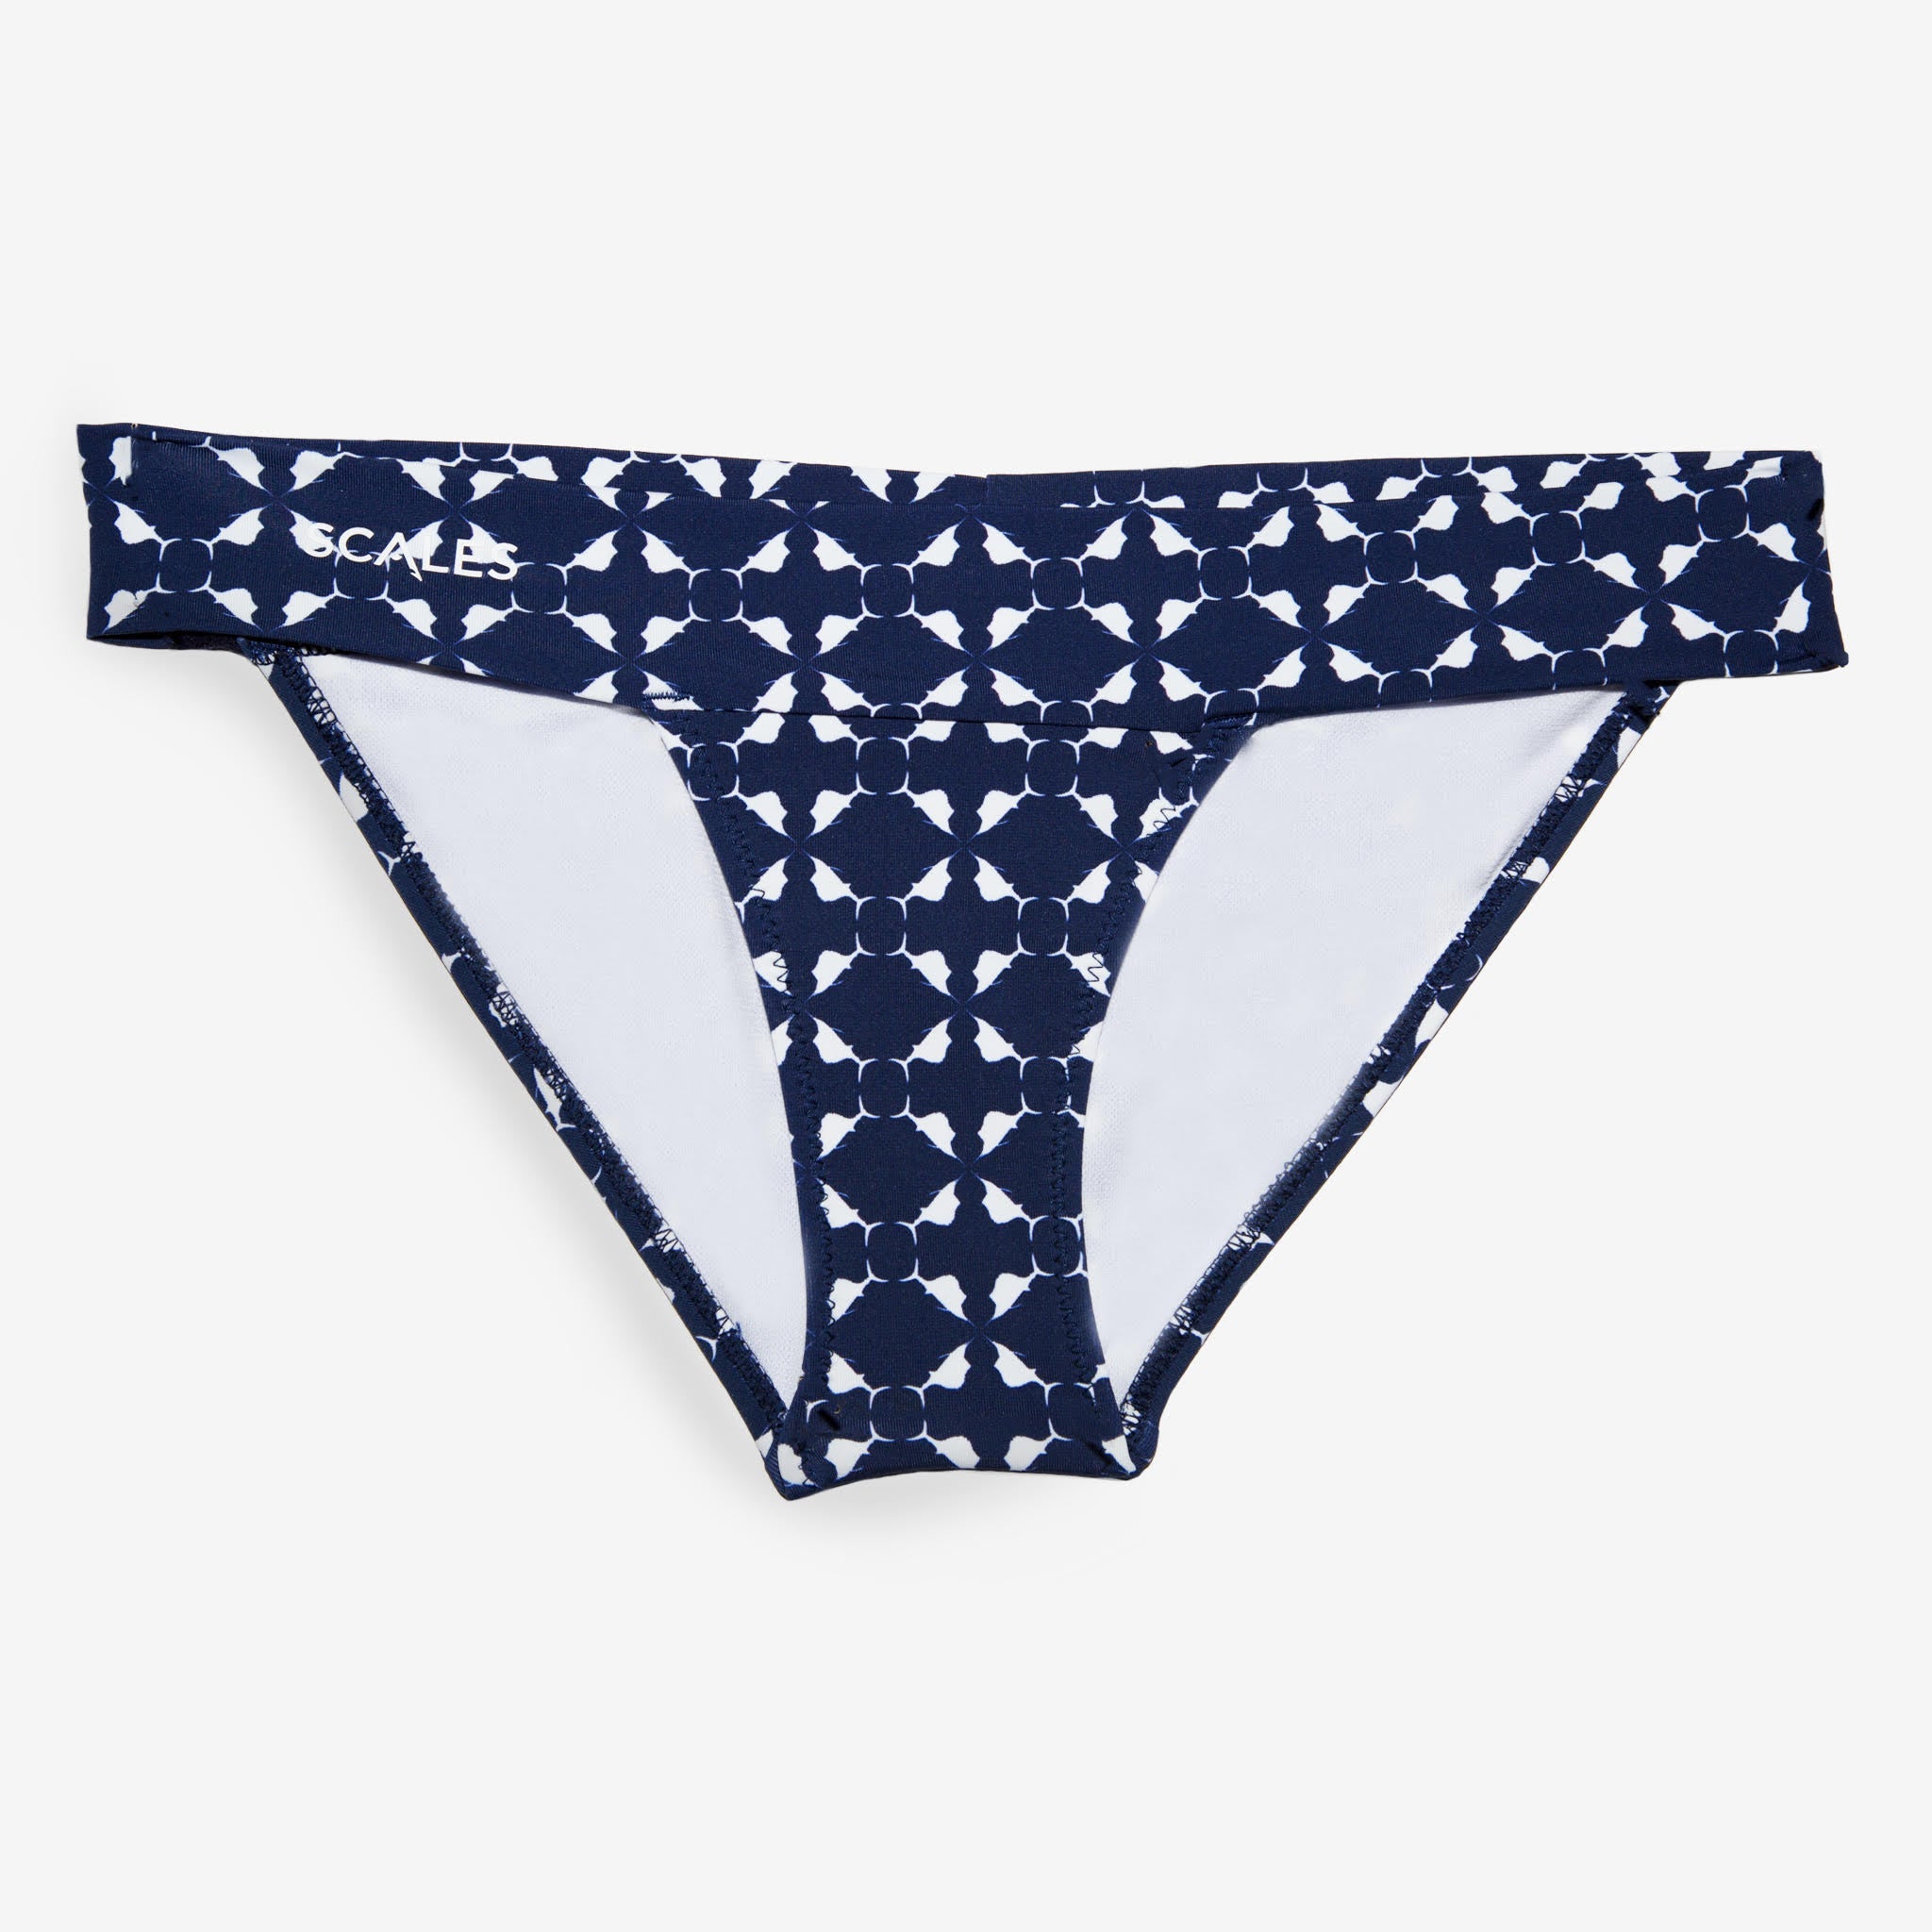 Scales Women's Swimwear Nautical Sailfish Banded Bottom Added Coverage in Navy Size M